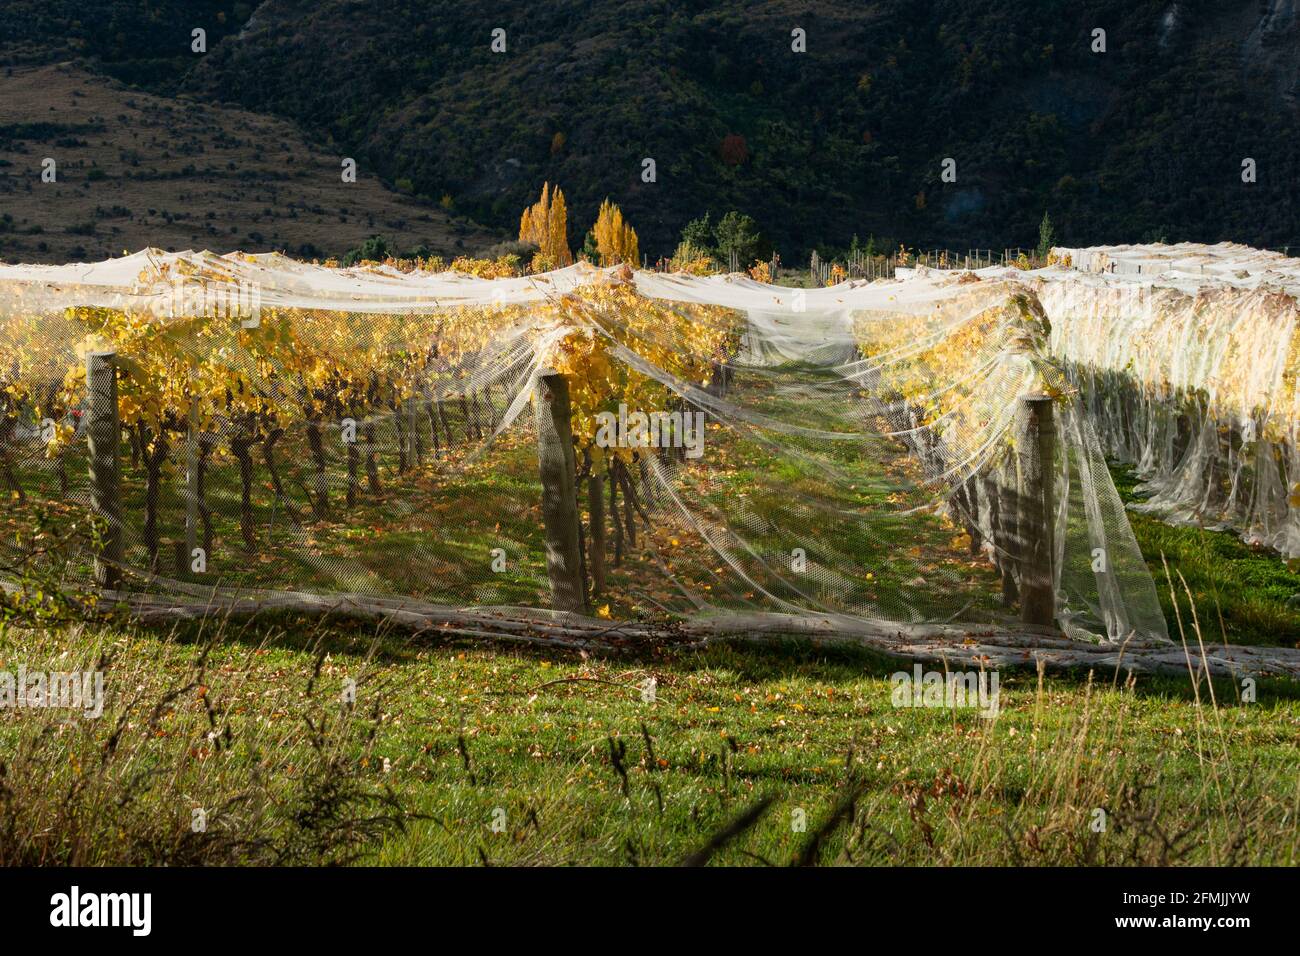 Netting on autumn yellow vines to prevent bird and wind damage, Otago region, South Island of New Zealand Stock Photo